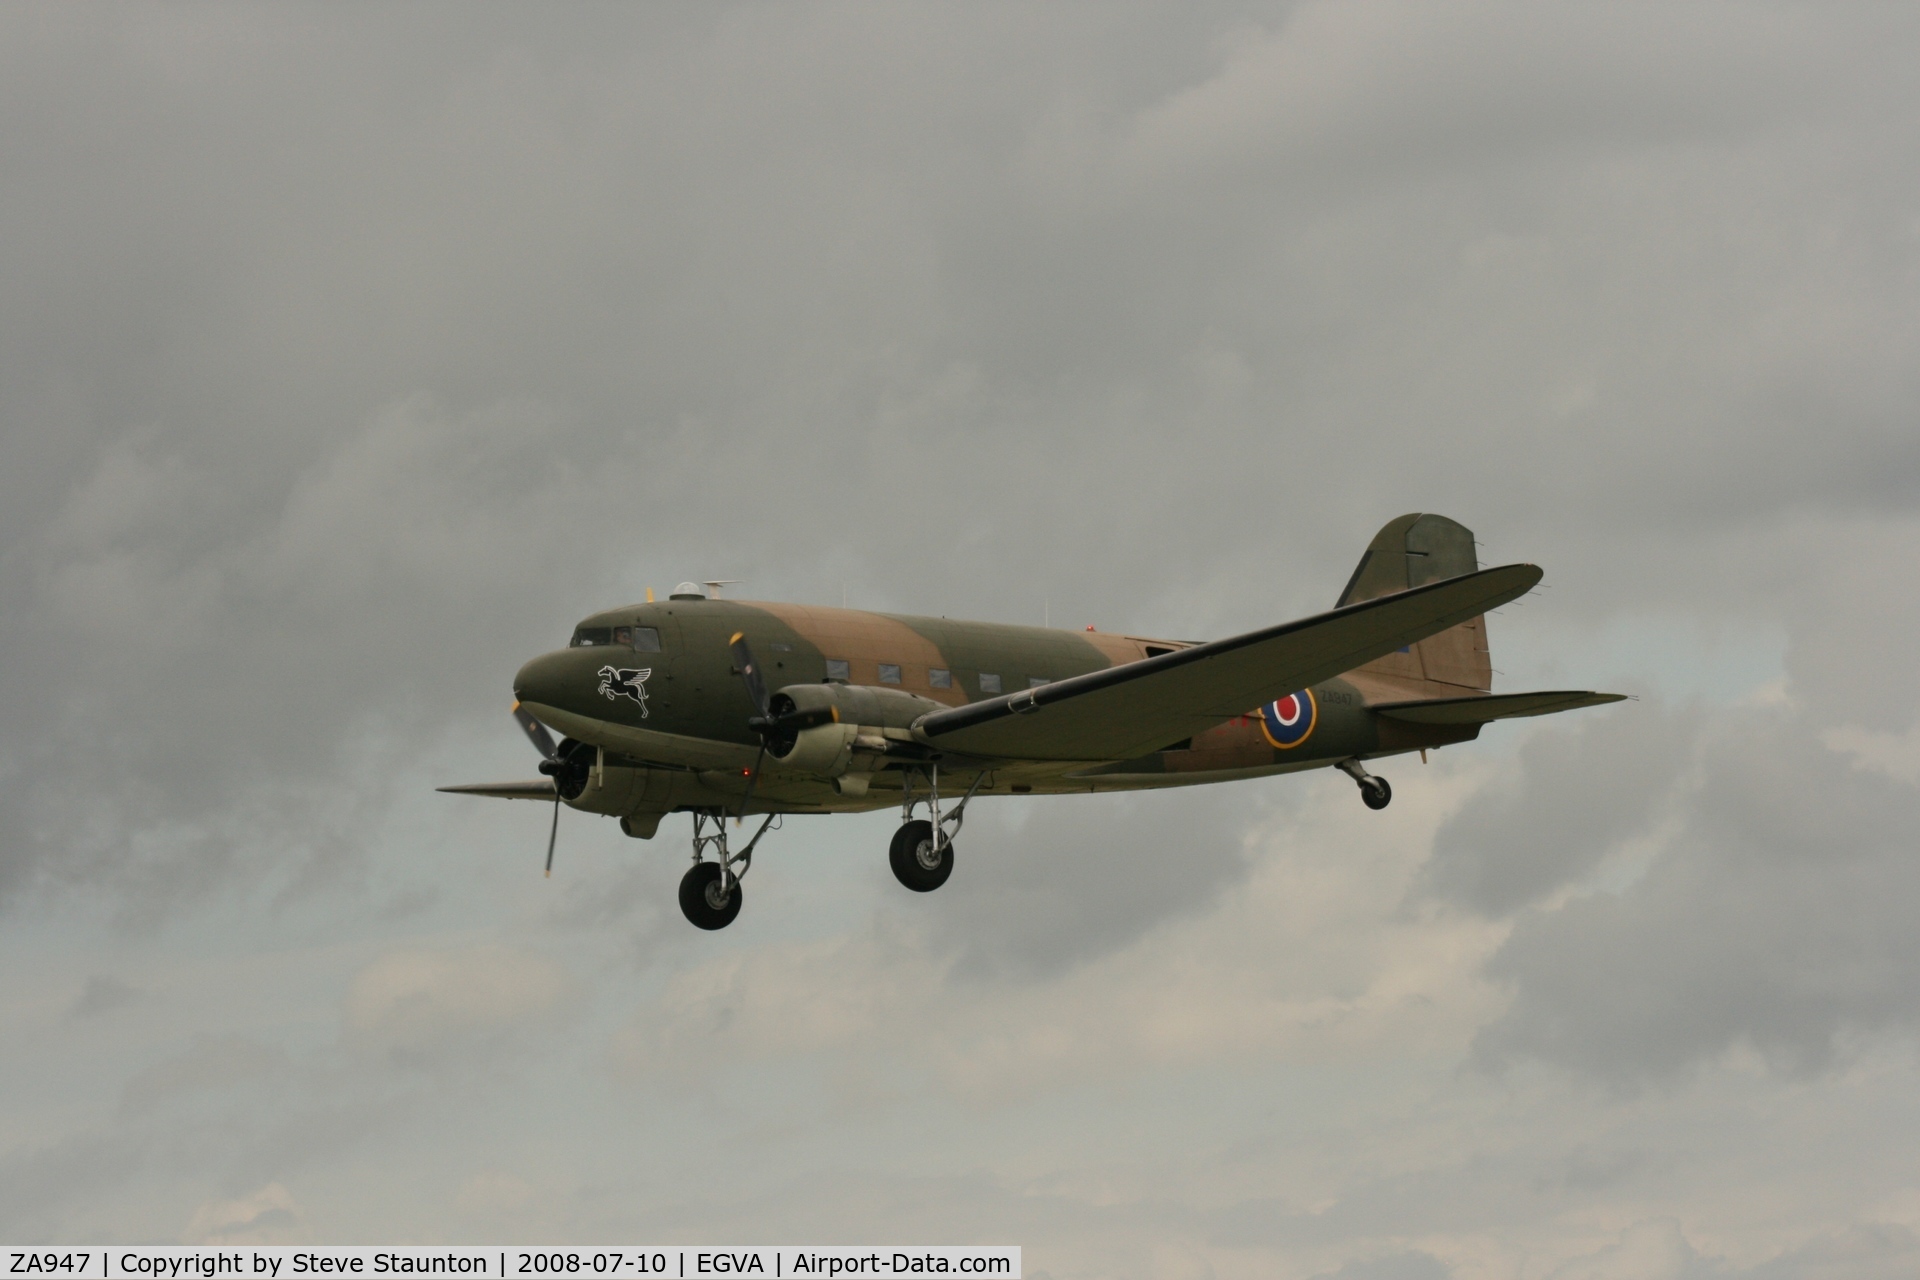 ZA947, 1943 Douglas C-47A-60-DL Dakota III C/N 10200, Taken at the Royal International Air Tattoo 2008 during arrivals and departures (show days cancelled due to bad weather)